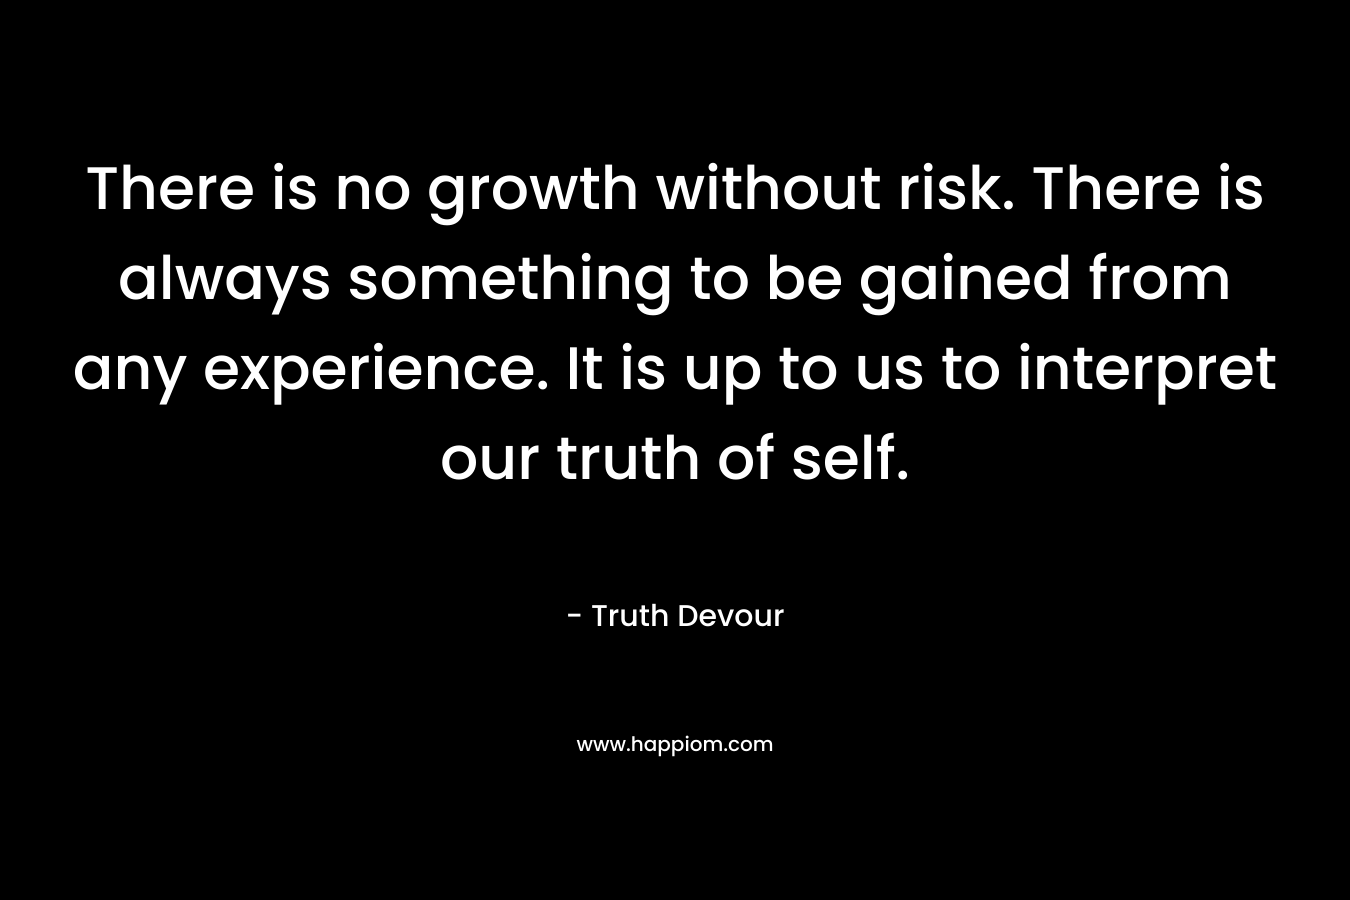 There is no growth without risk. There is always something to be gained from any experience. It is up to us to interpret our truth of self.